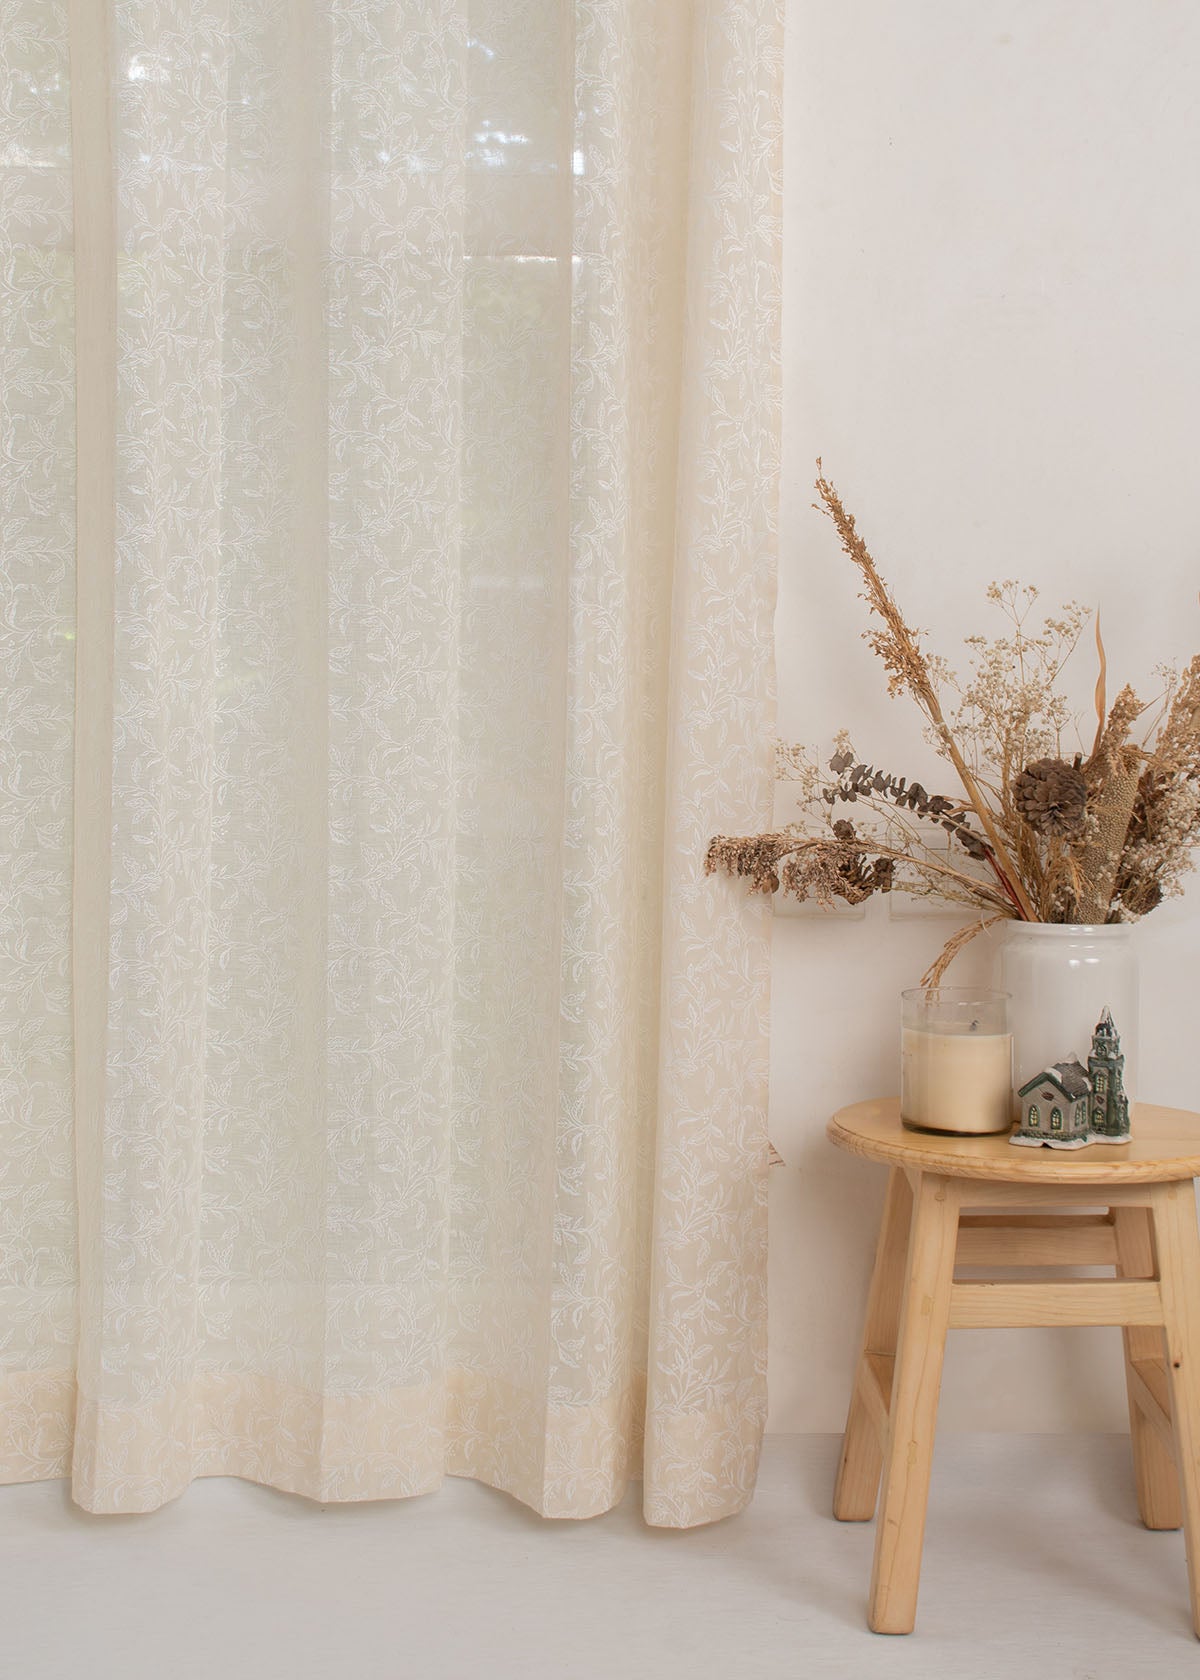 Trailing Berries 100% Customizable Cotton Sheer minimal curtain for Living room - Light filtering - Cream